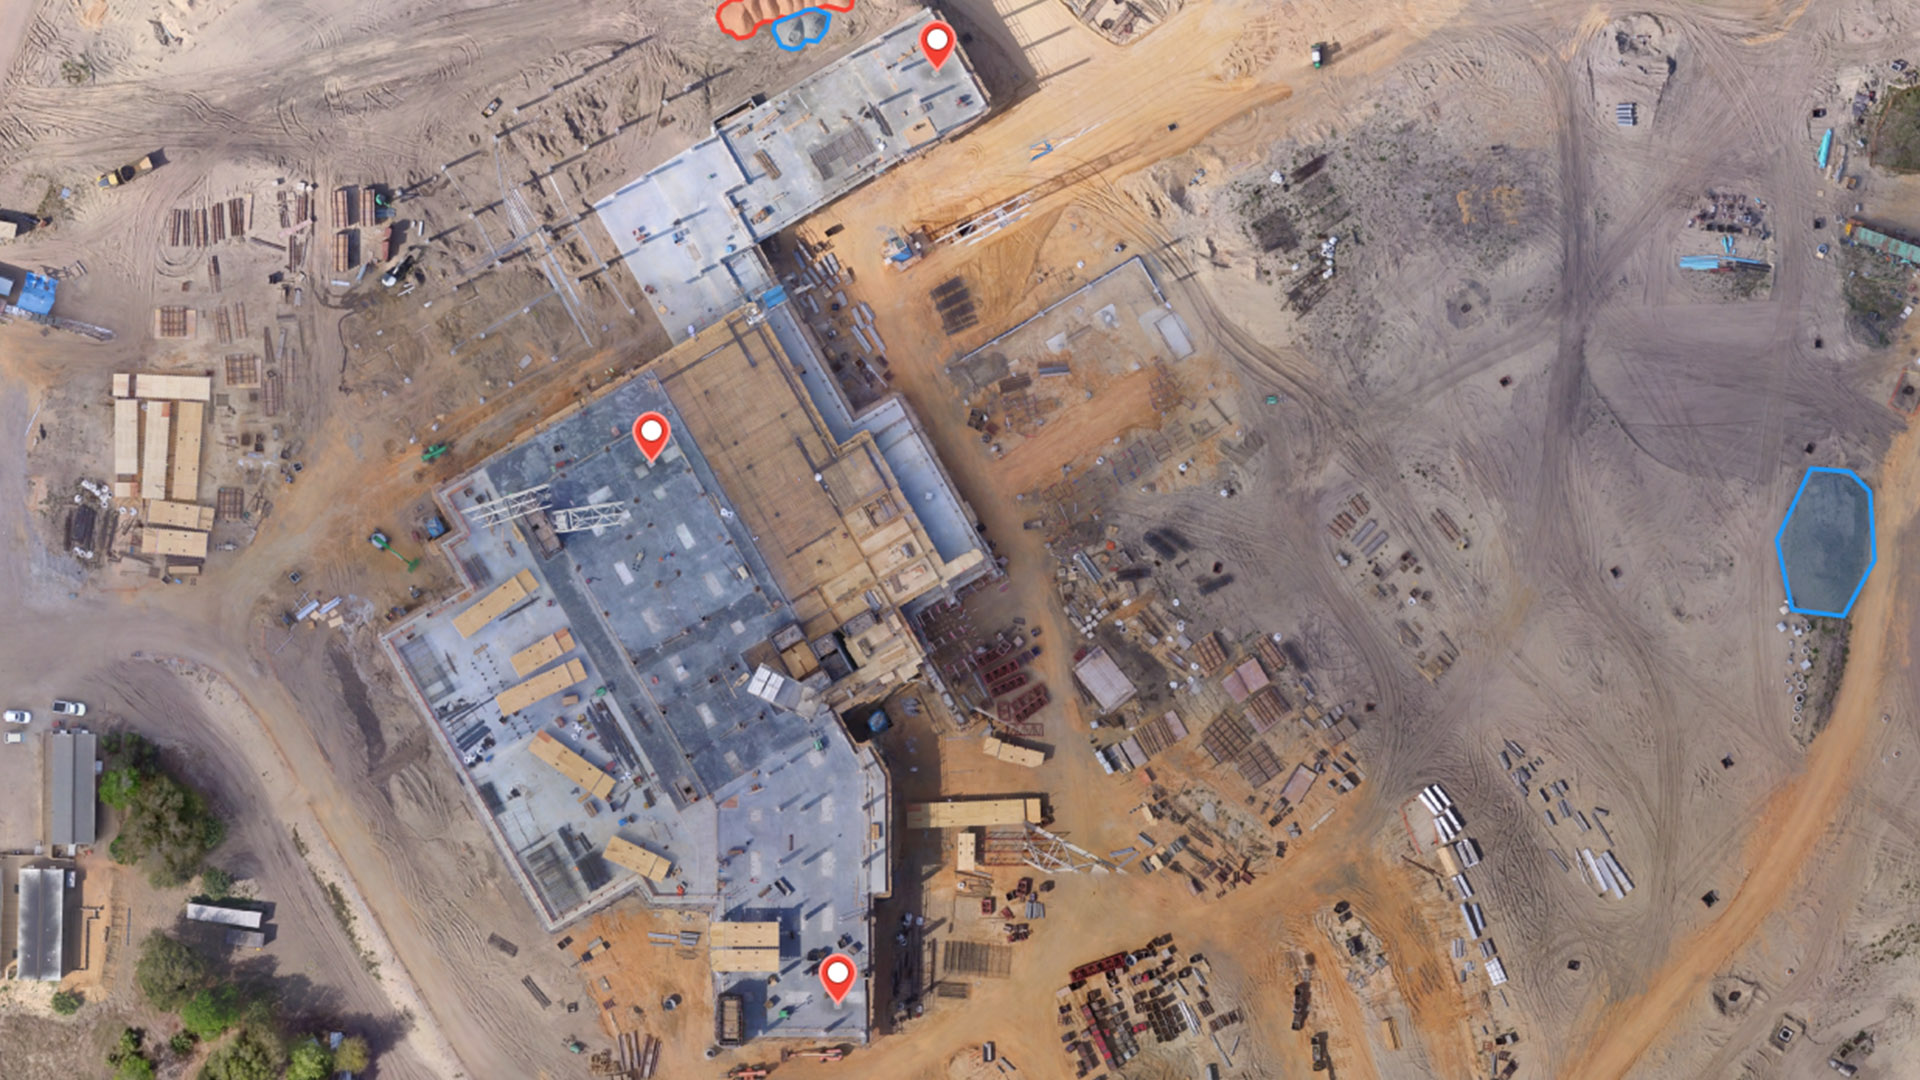 Drones are gathering crutial data on construction sites